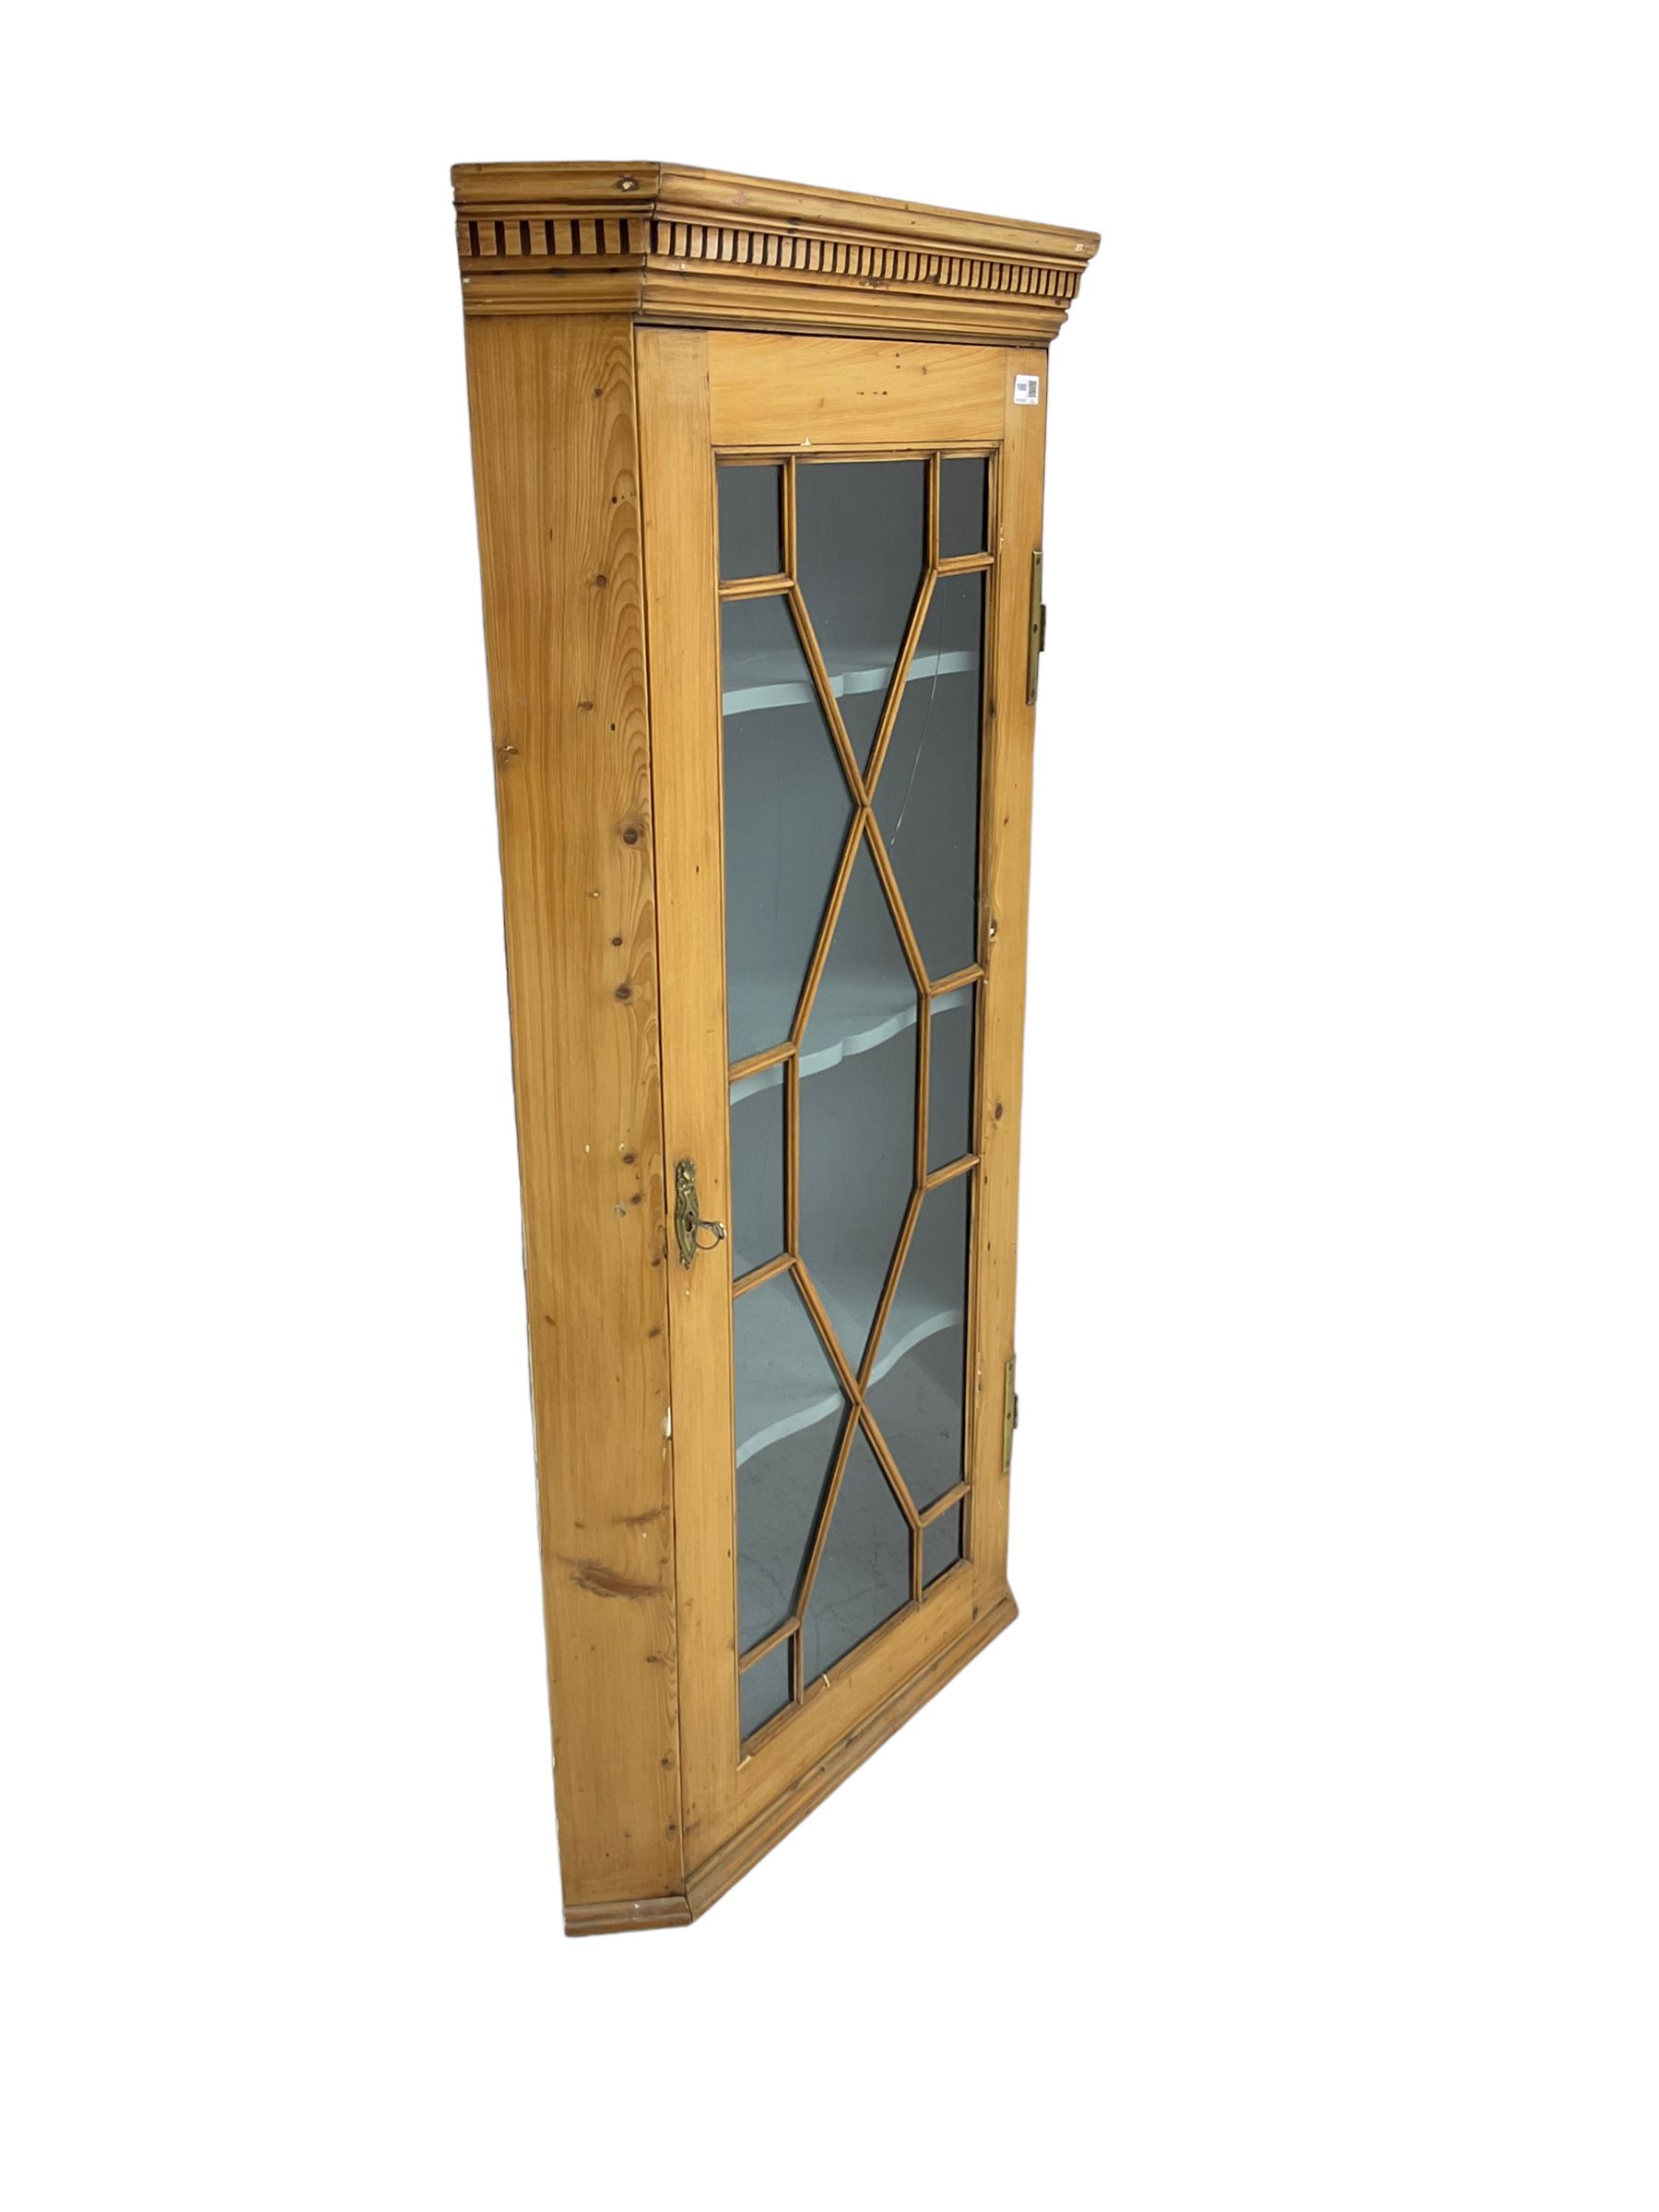 Early 19th century pine corner cabinet - Image 2 of 7